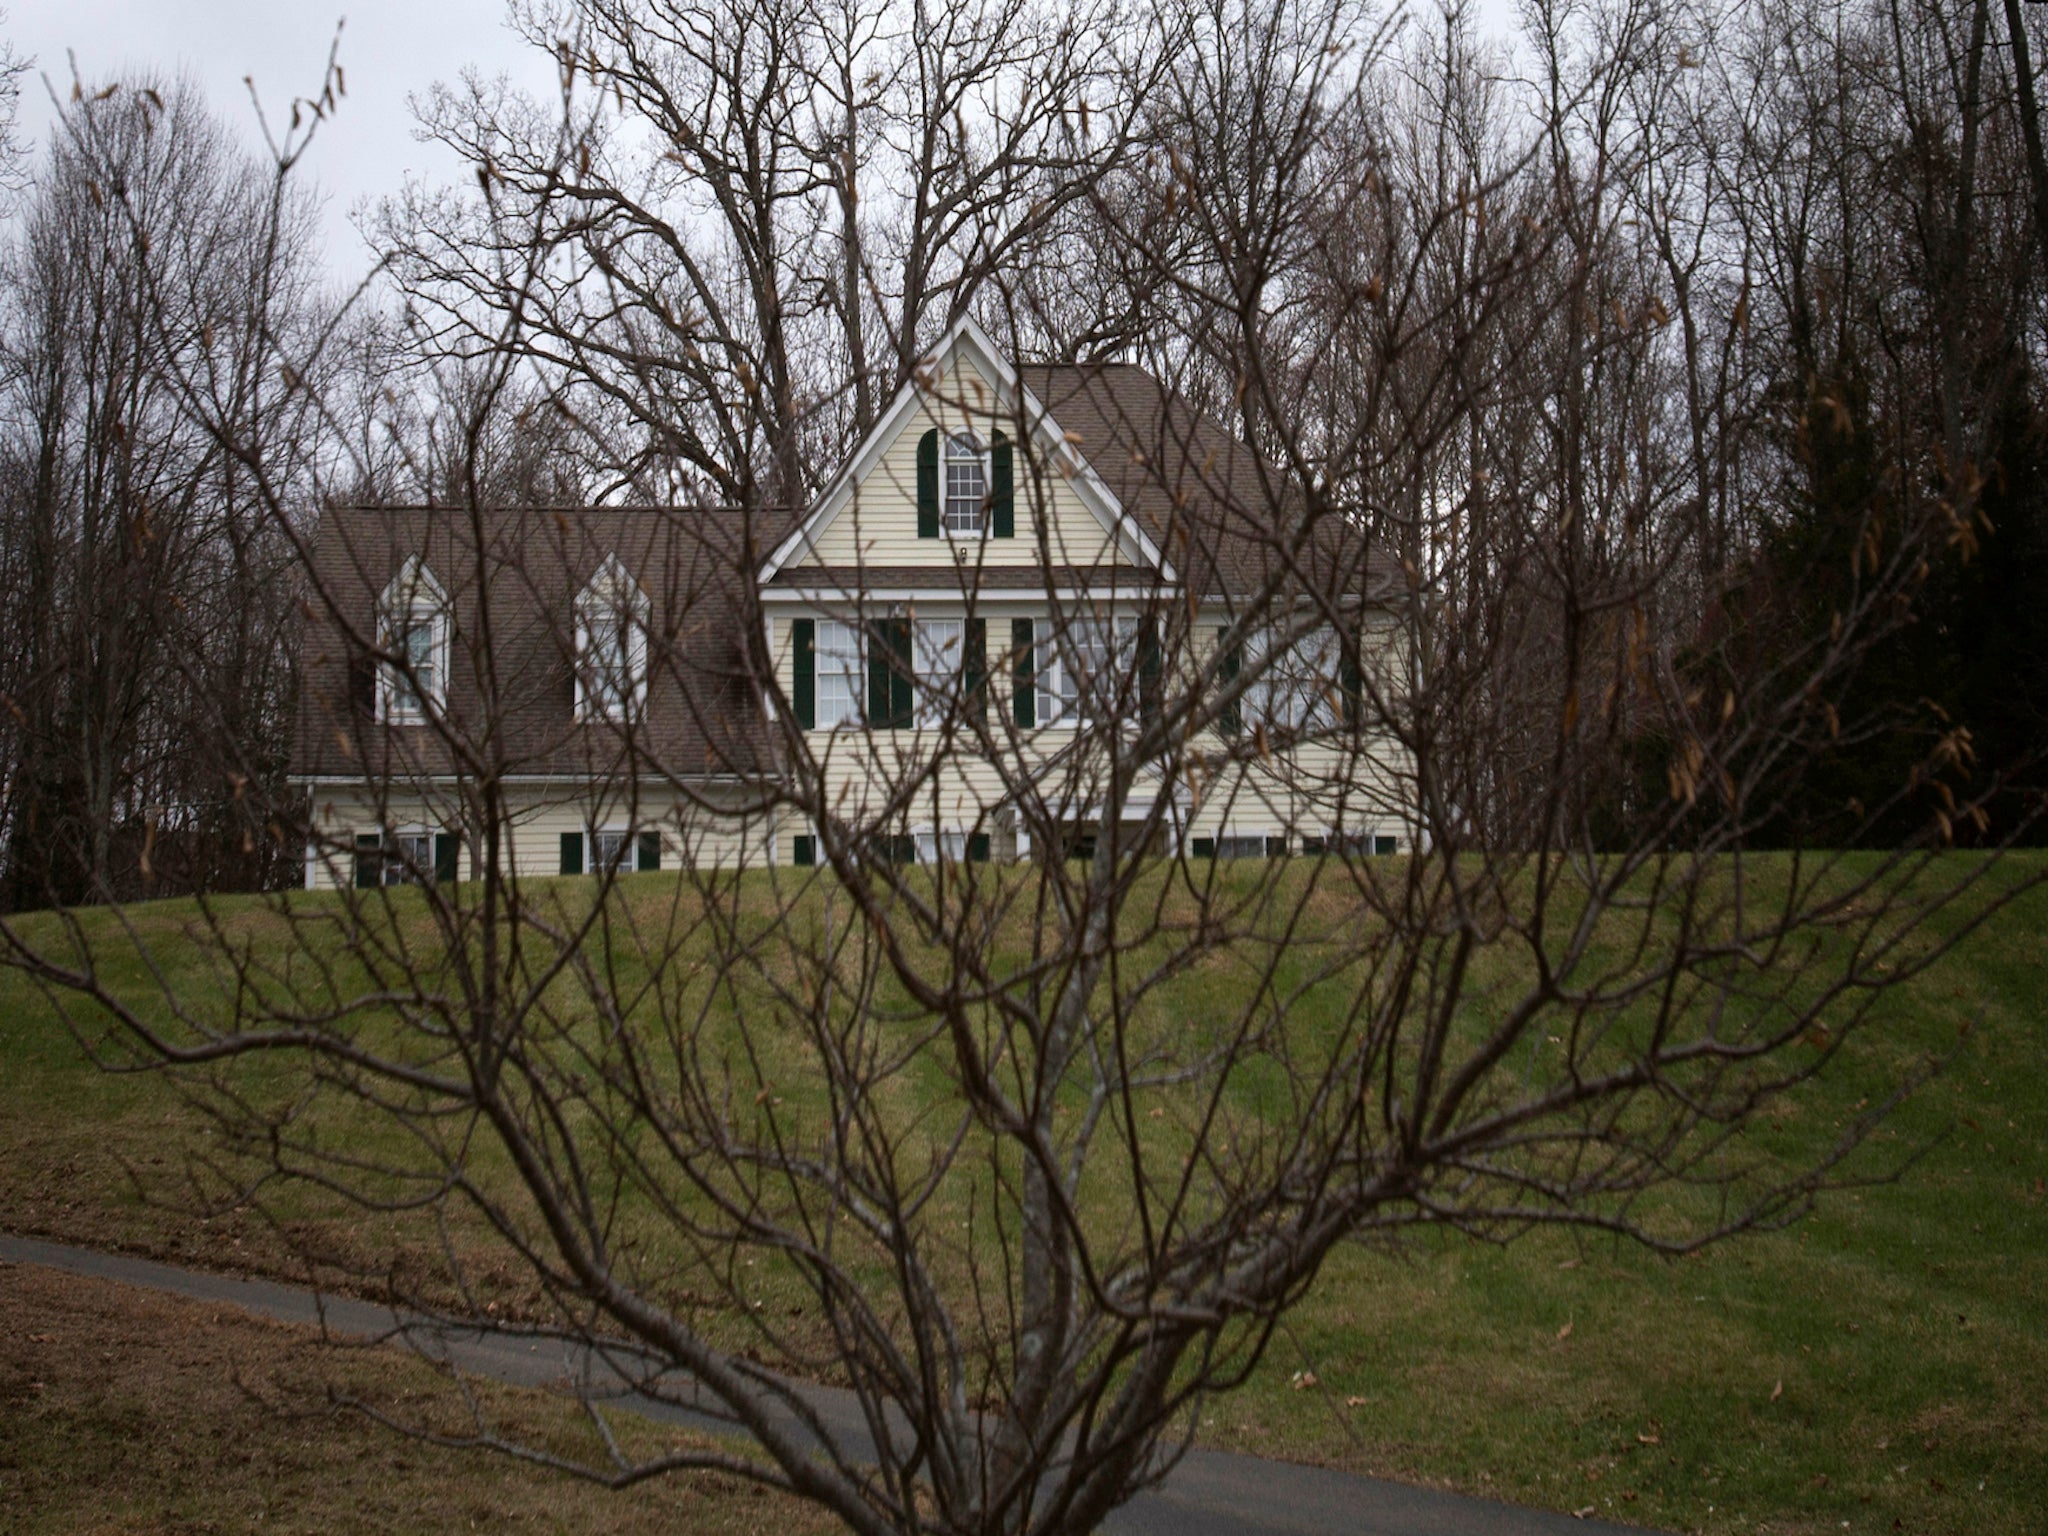 Officials voted to destroy Adam Lanza's home earlier this year